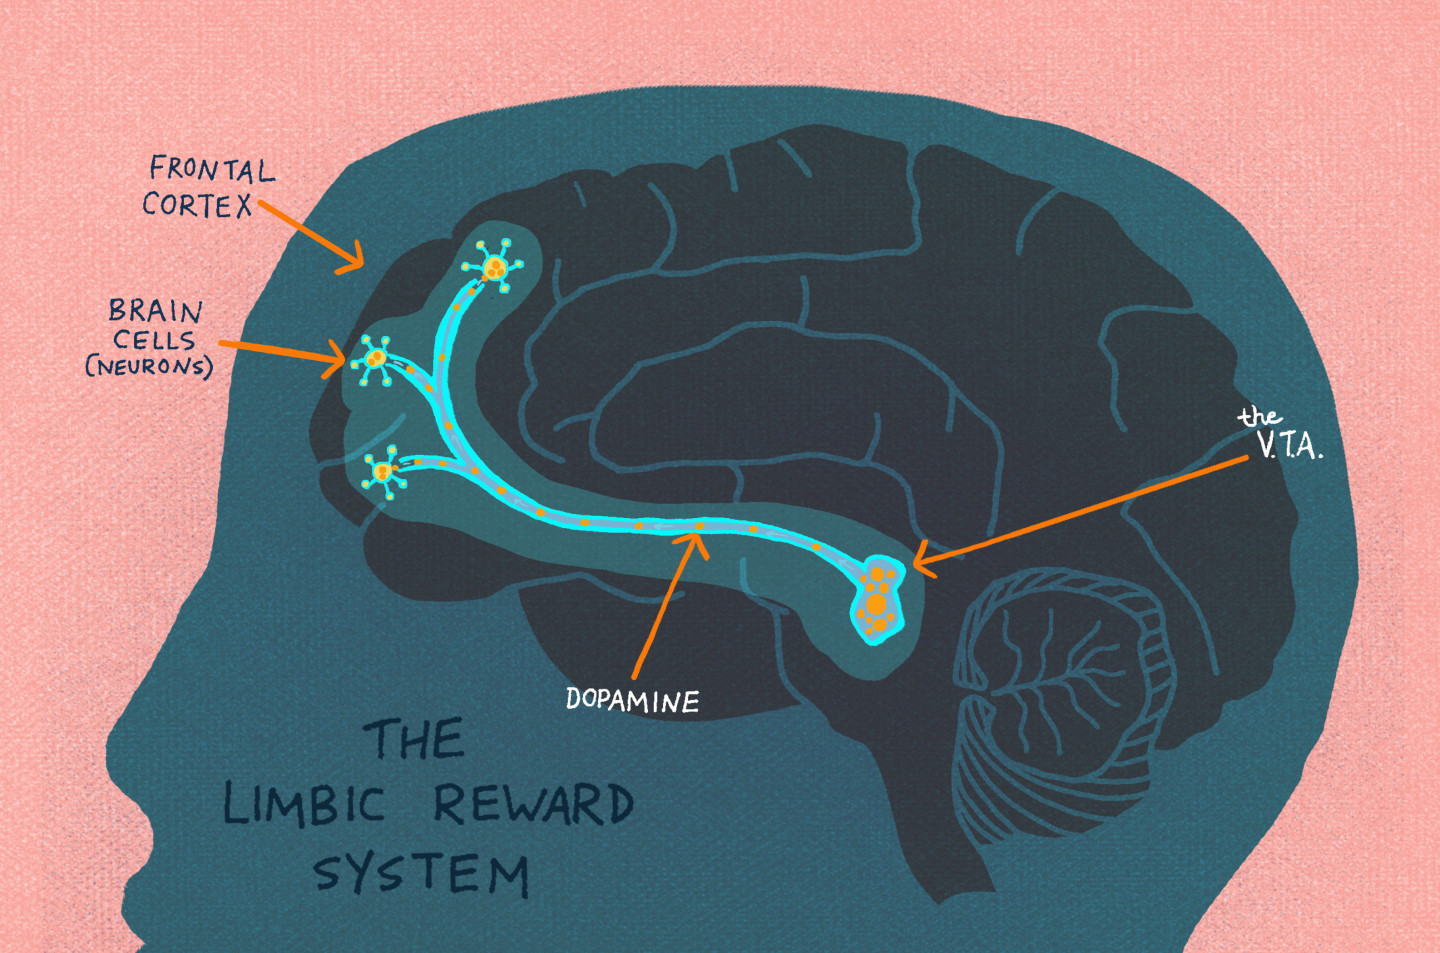 What’s Going on Inside the Brain Of A Curious Child?